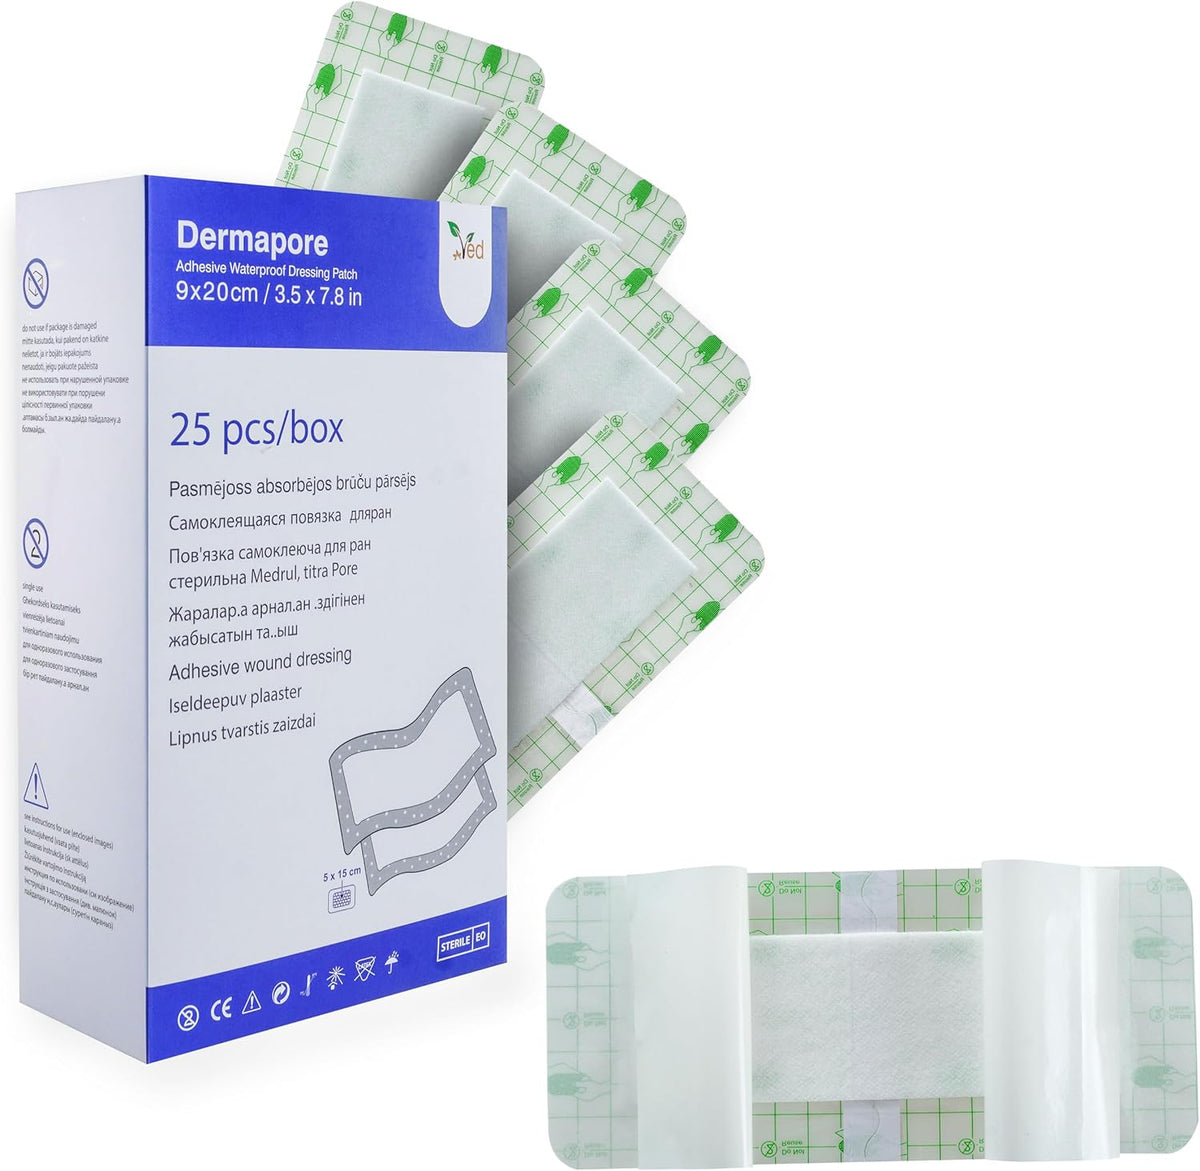 VED Dermapore Waterproof Adhesive Wound Dressing- Suitable for cuts and grazes, Diabetic Leg ulcers, venous Leg ulcers, Small Pressure sores- Medium, 9 x 20cm (Pack of 25).